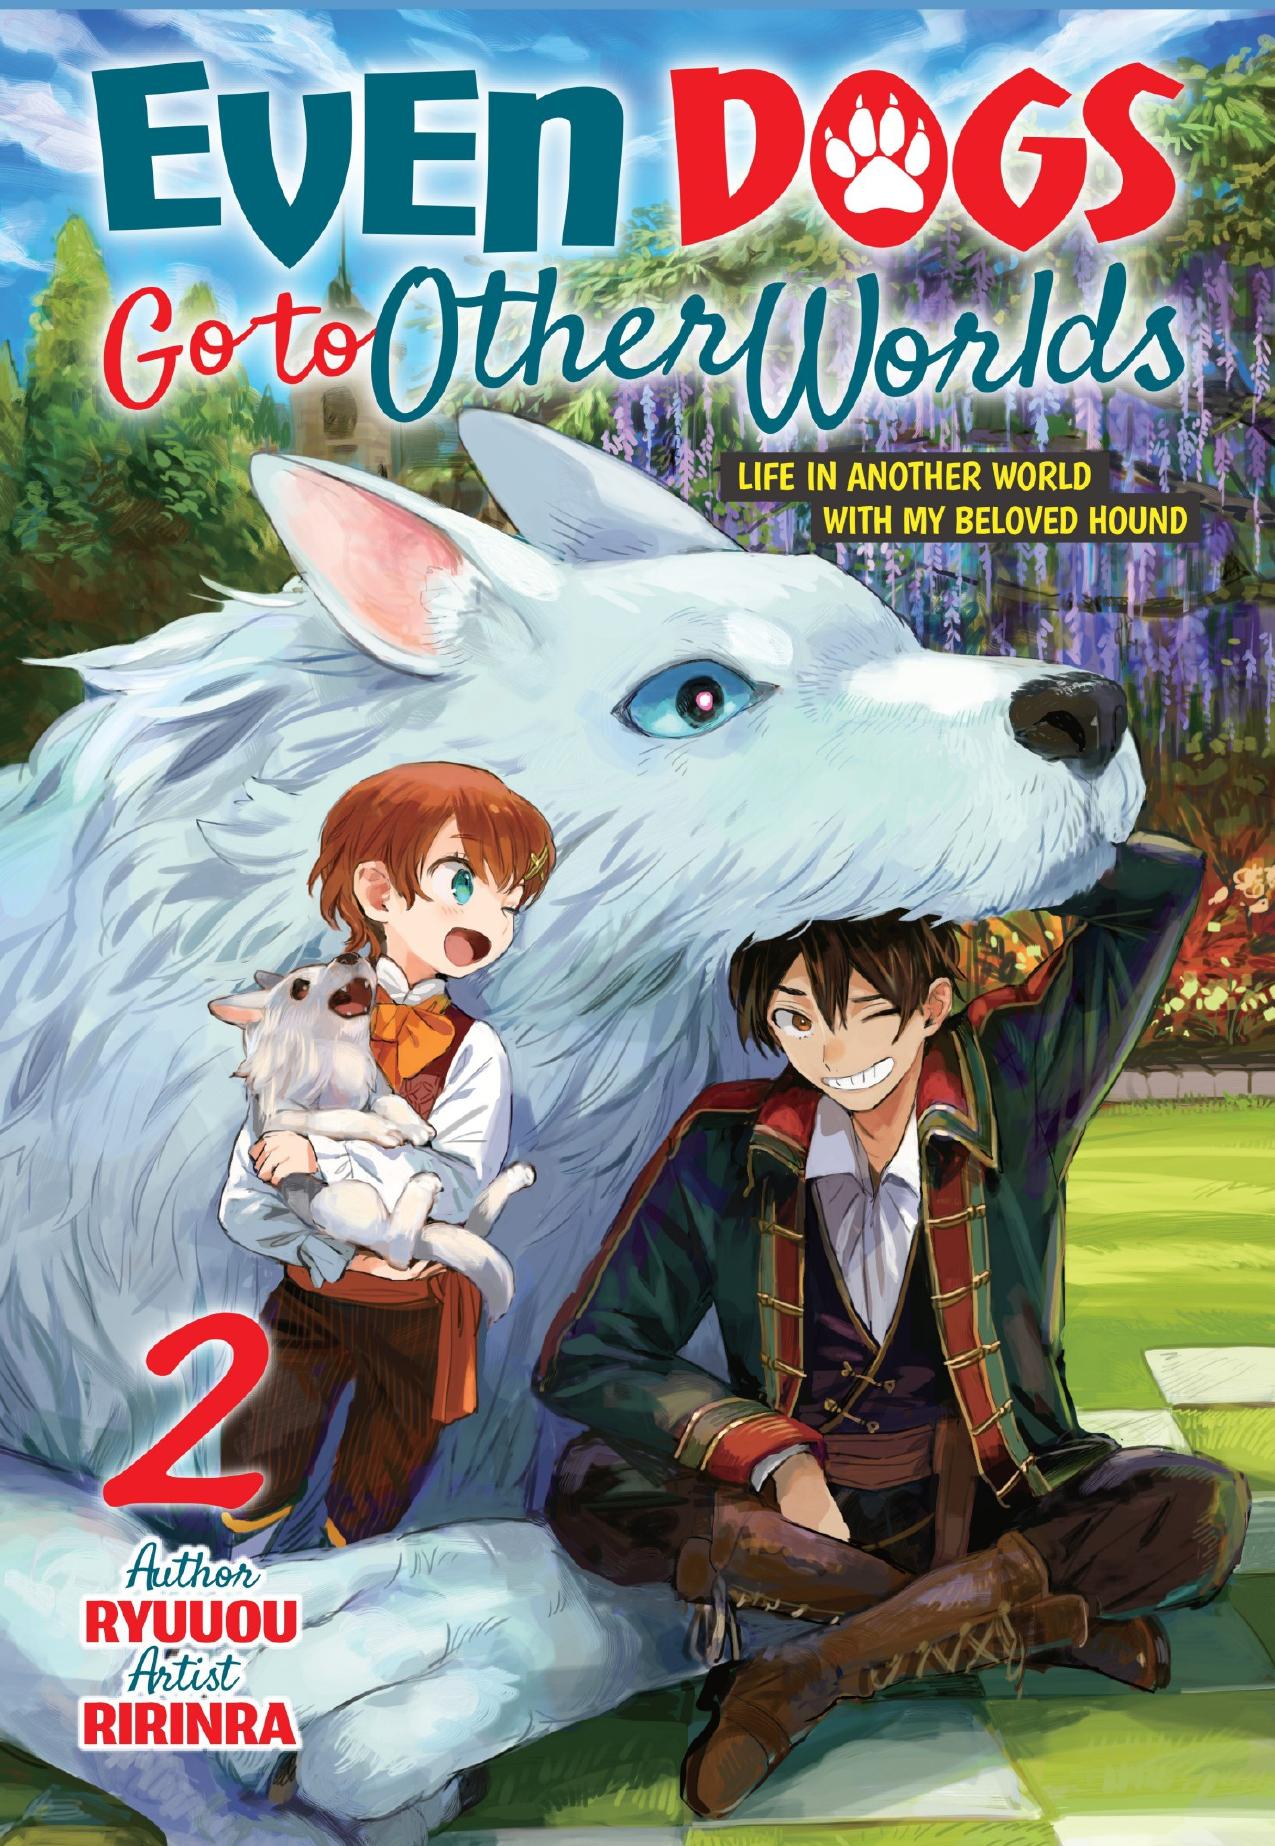 Even Dogs Go to Other Worlds: Life in Another World with My Beloved Hound Volume 2 by Ryuuou